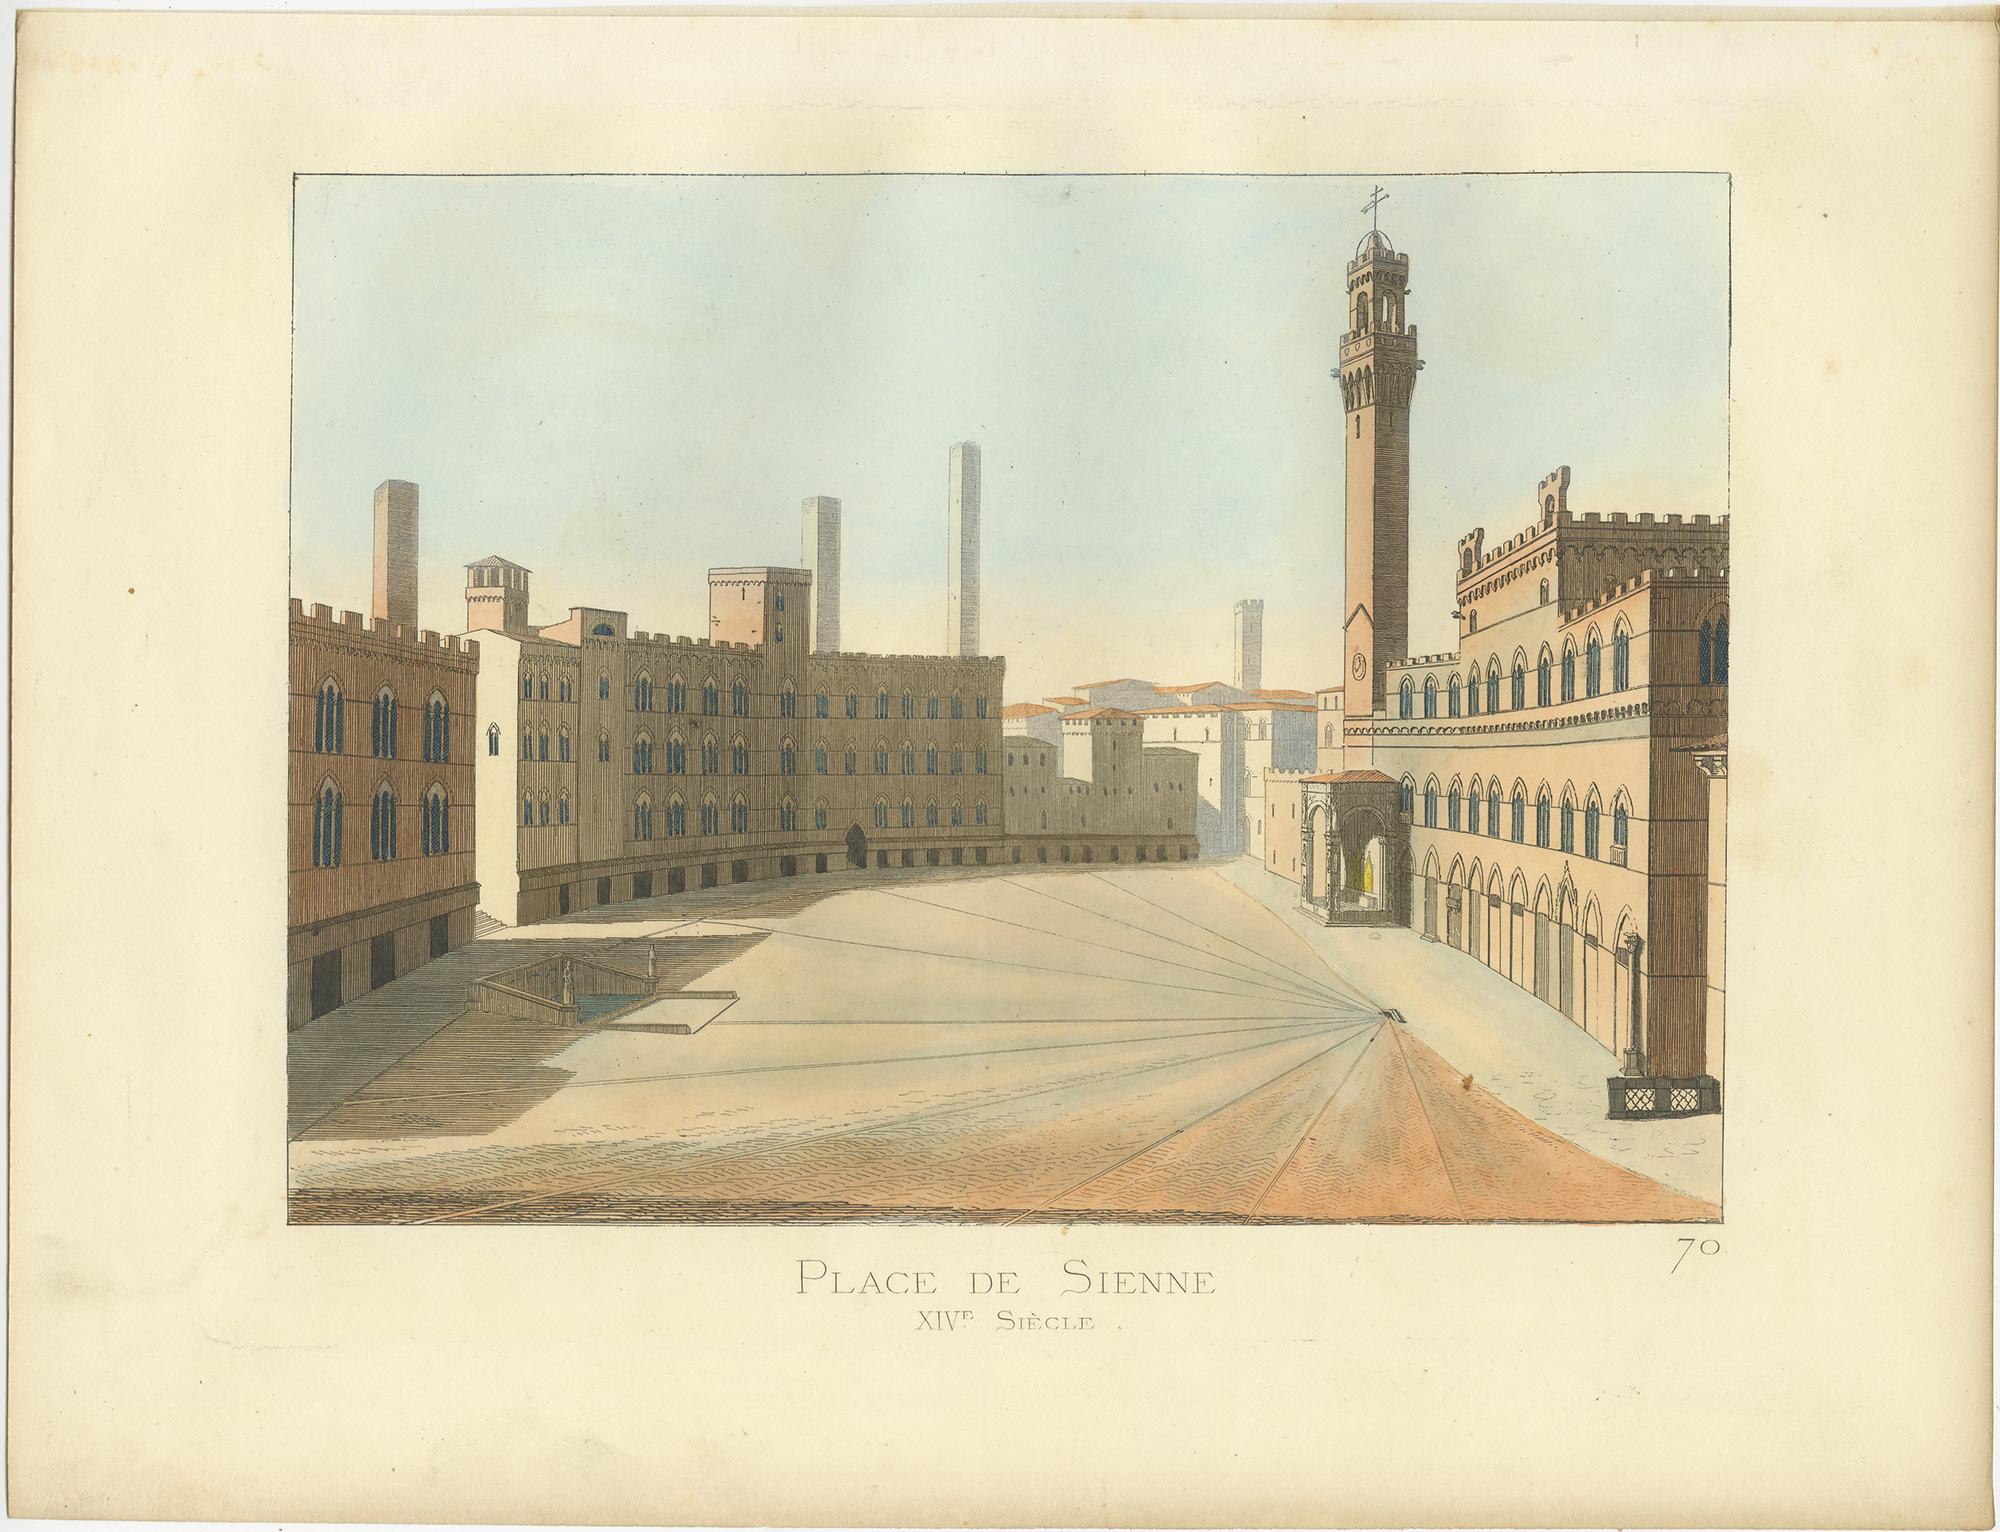 Antique print titled ‘Place de Sienne, XVe Siecle.’ Original antique print of the Piazza del Campo, the main public space of the historic center of Siena, Tuscany, Italy. This print originates from 'Costumes historiques de femmes du XIII, XIV et XV